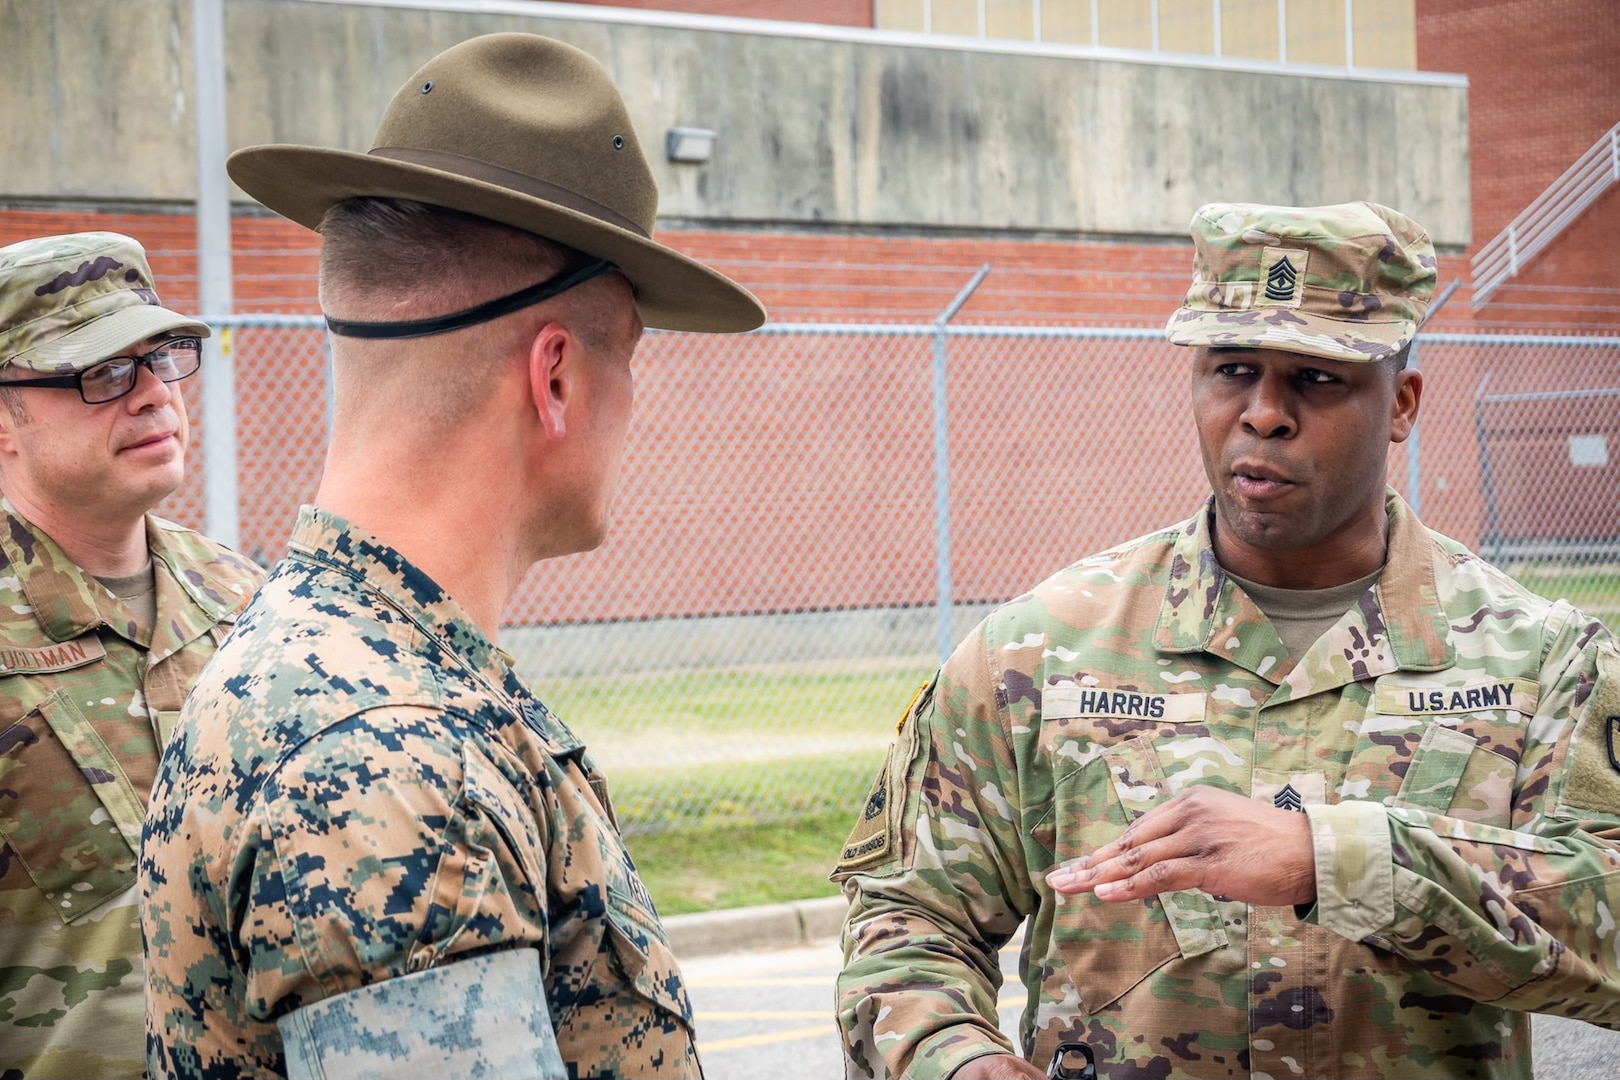 Army 1st Sgt. Jamar Harris, USMEPCOM 2nd BN senior enlisted advisor, discusses trends with a drill sergeant at a Leaders Professional Development Event. The Leaders Professional Development event was held 10 - 13 Oct. at Marine Corps Recruit Depot, Parris Island, South Carolina.